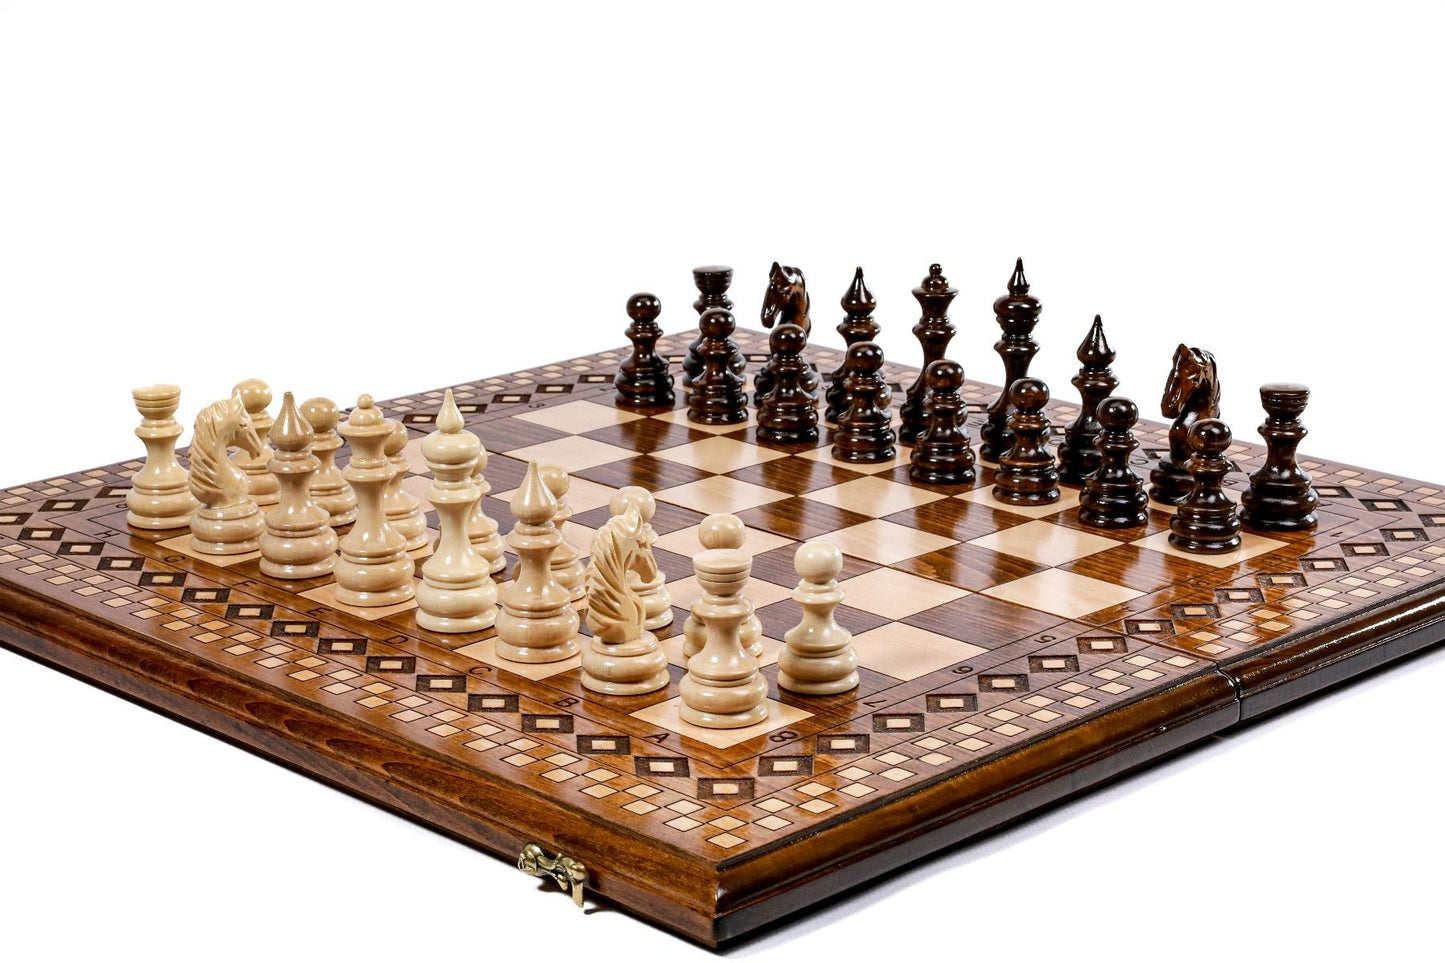 Dive into the elegance of chess with a set that celebrates Armenian heritage, featuring intricate carpet patterns on handcrafted wood.